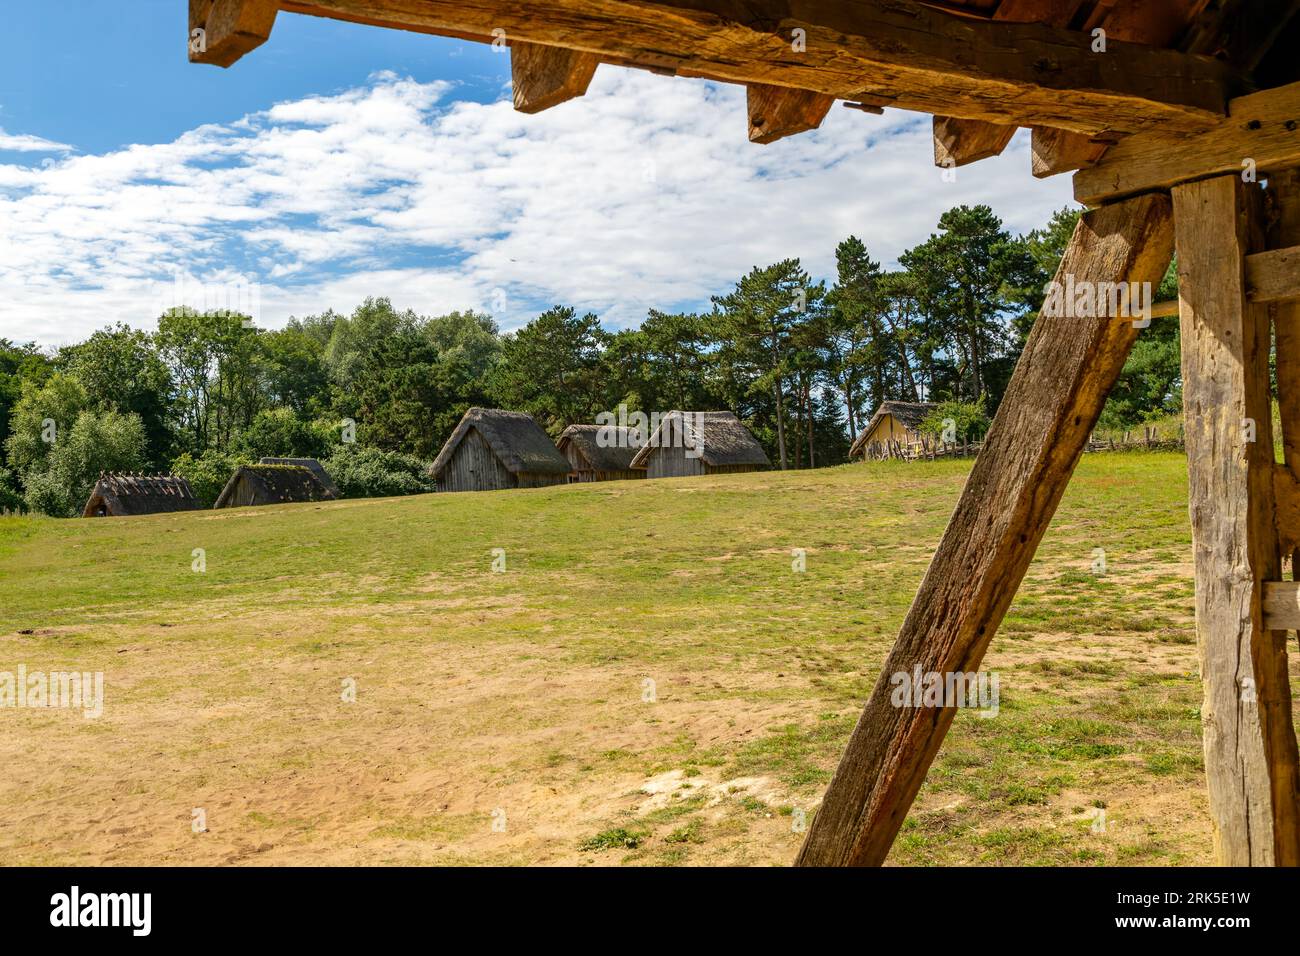 Wood and thatch buildings at West Stow, Anglo-Saxon village, Suffolk, England, UK Stock Photo